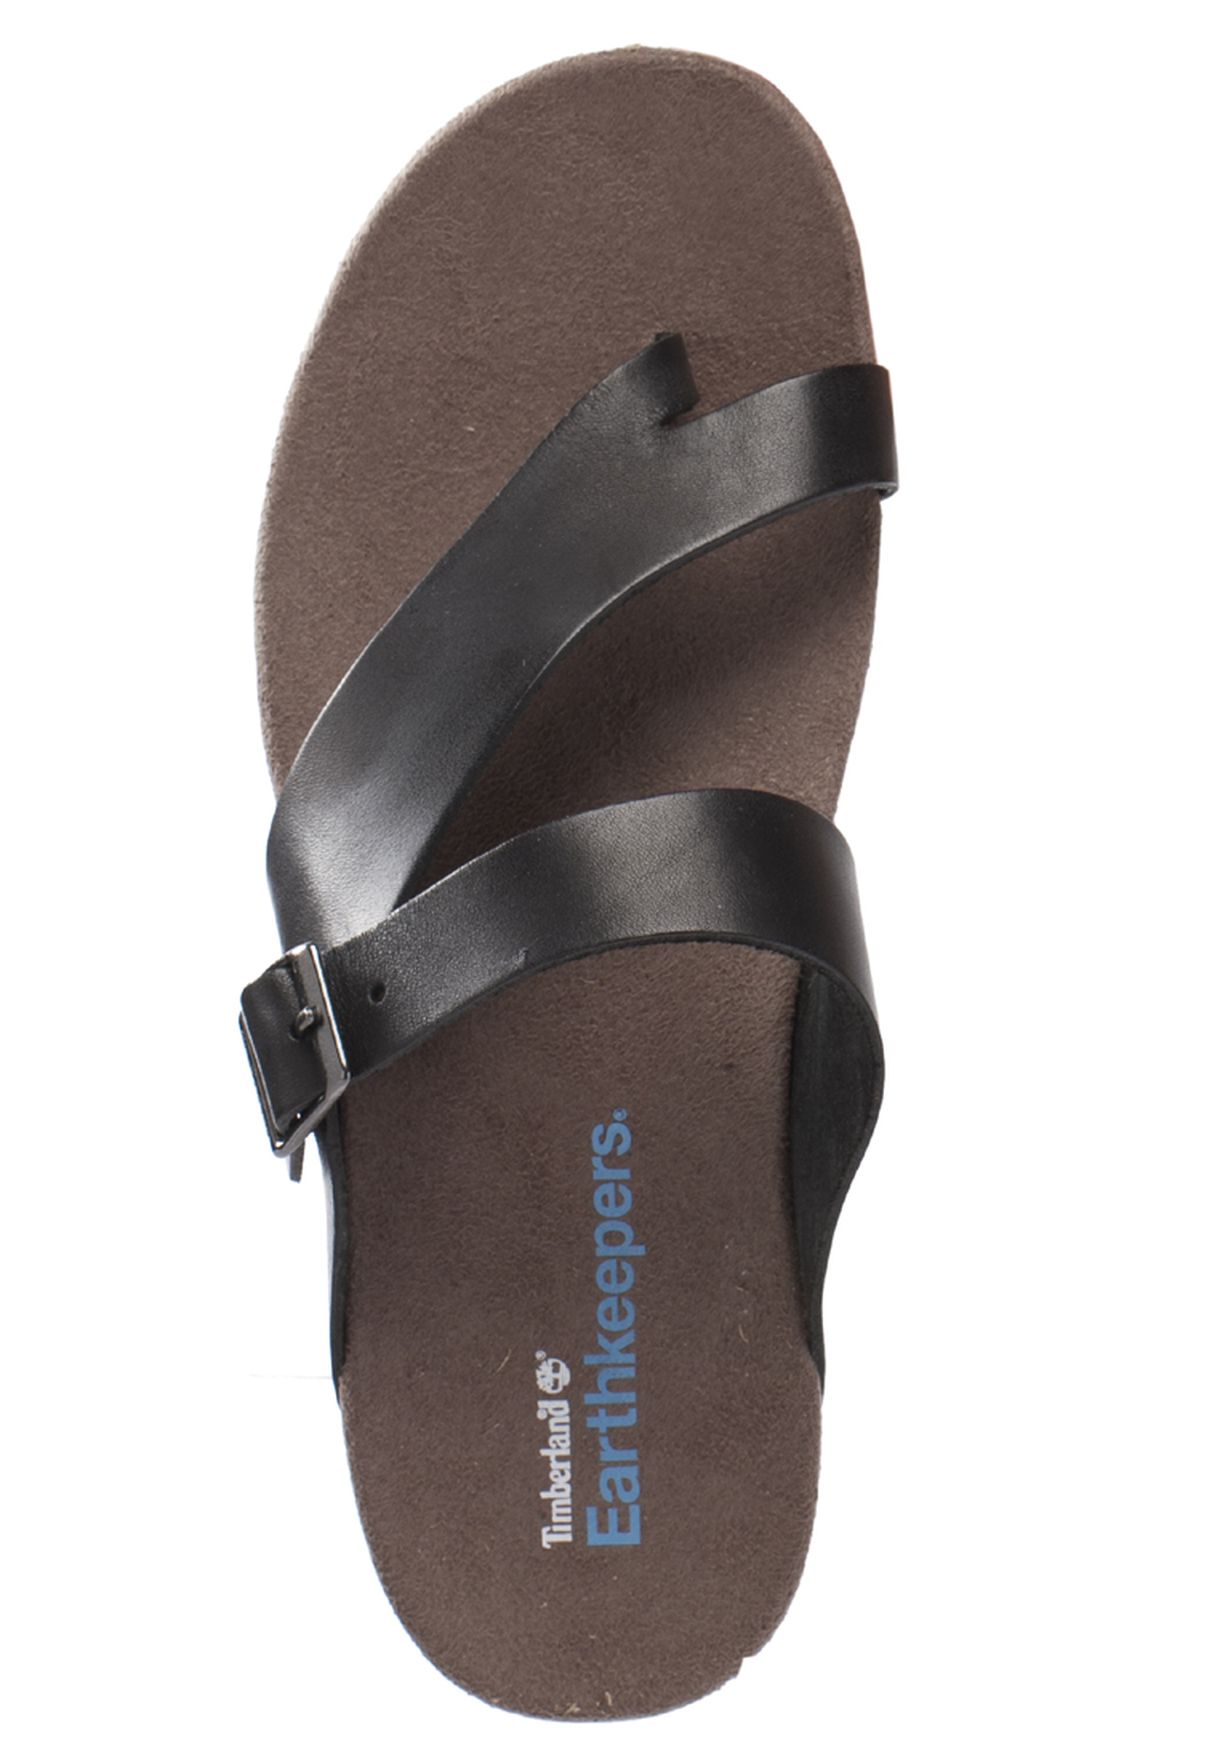 earthkeepers sandals